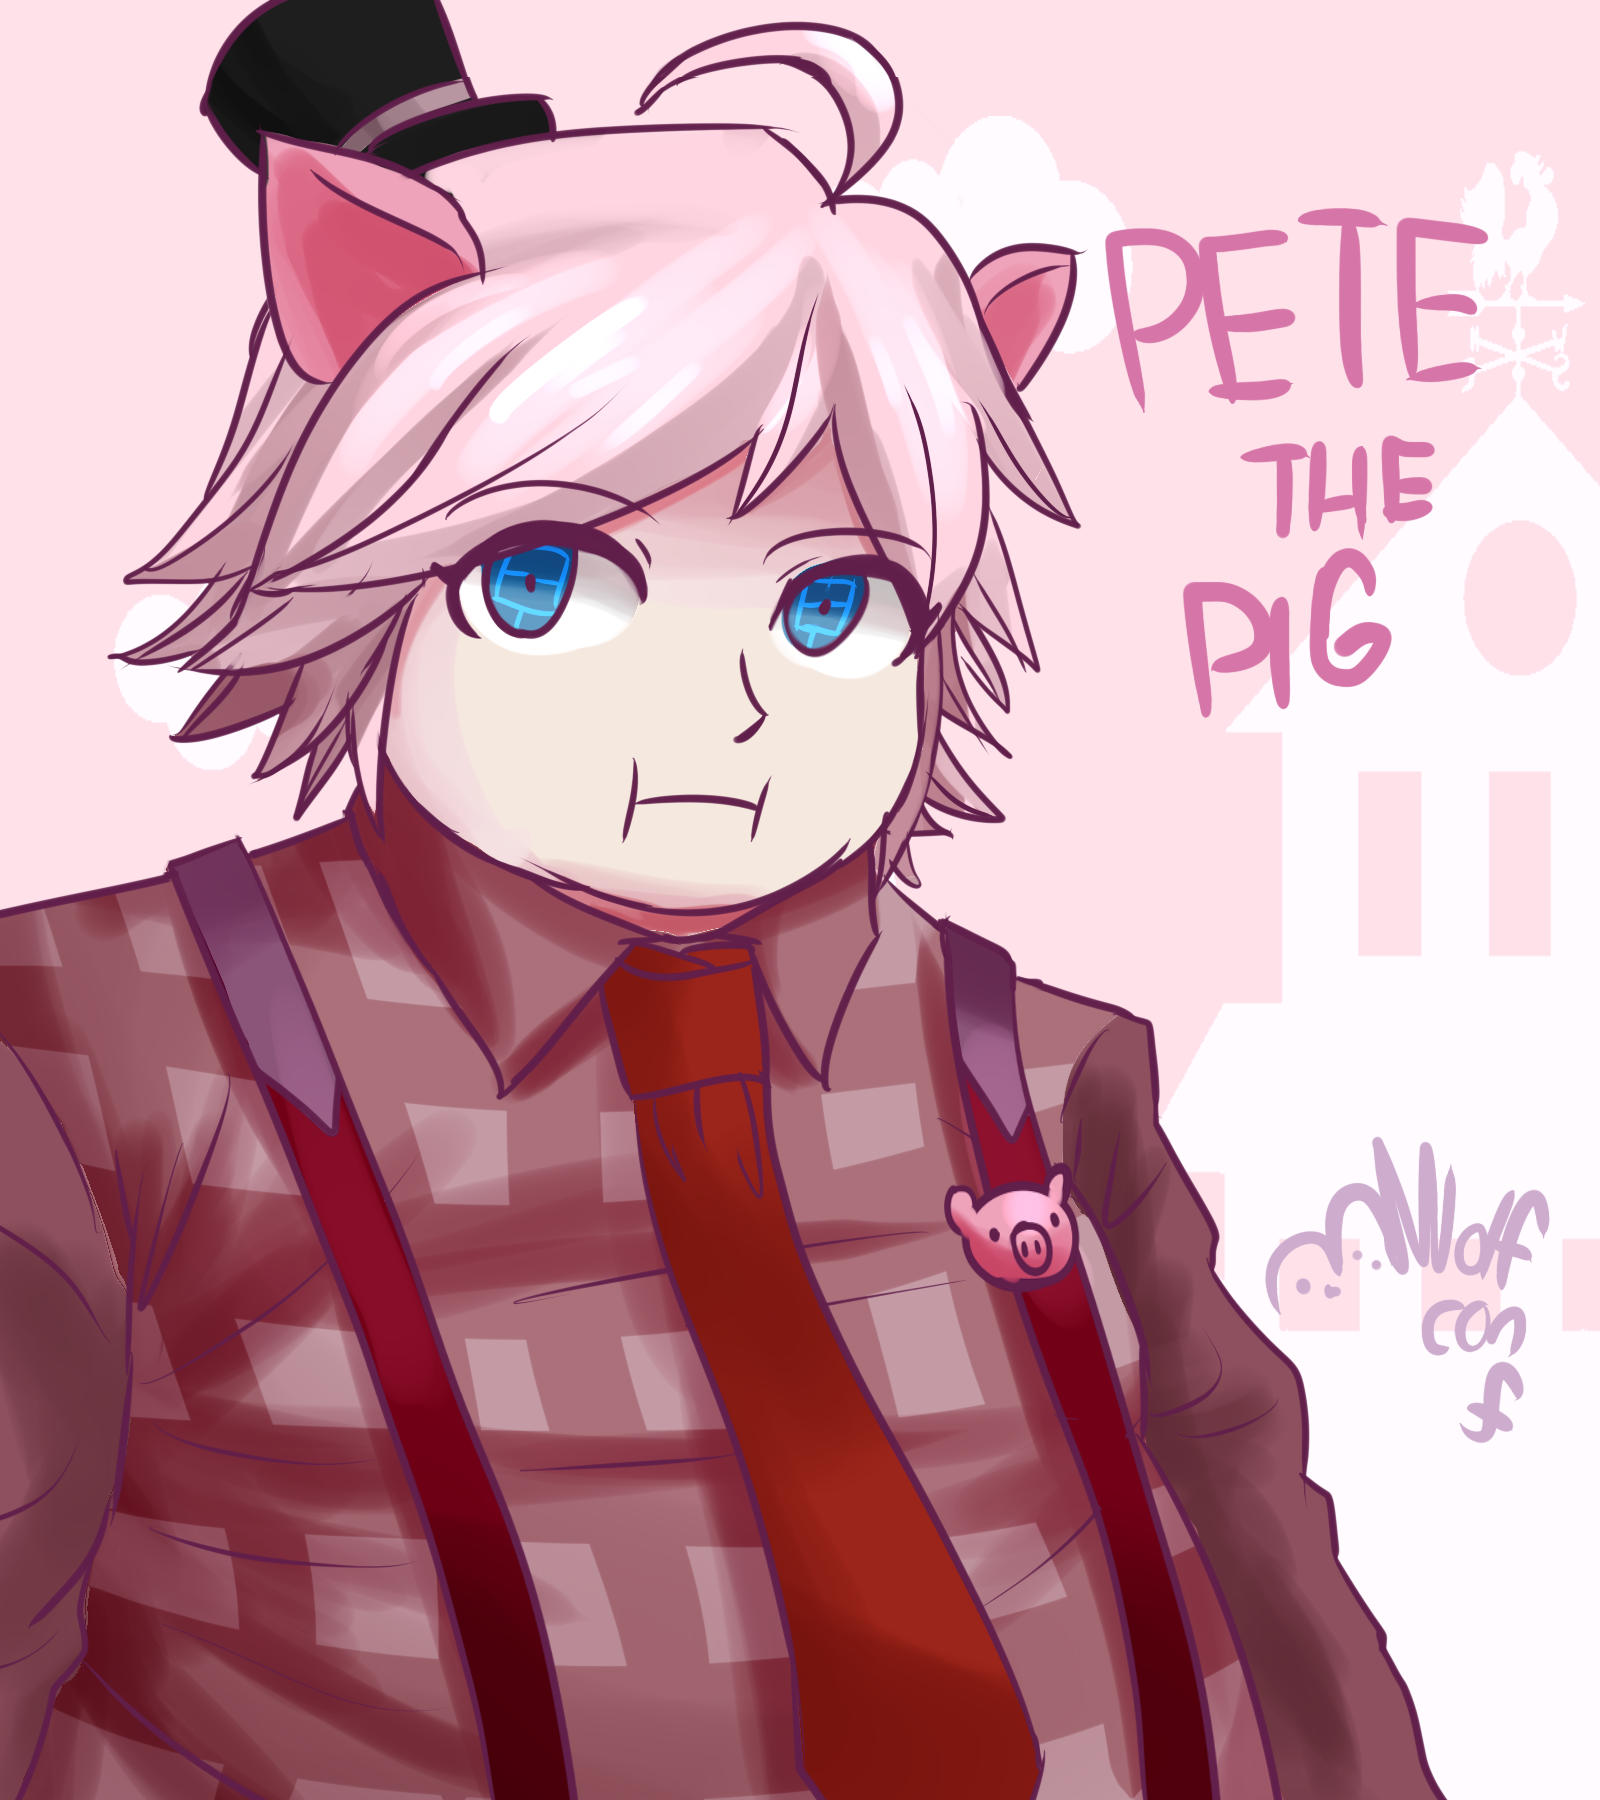 The Pig and the Wolf by JJMonsterJ on DeviantArt